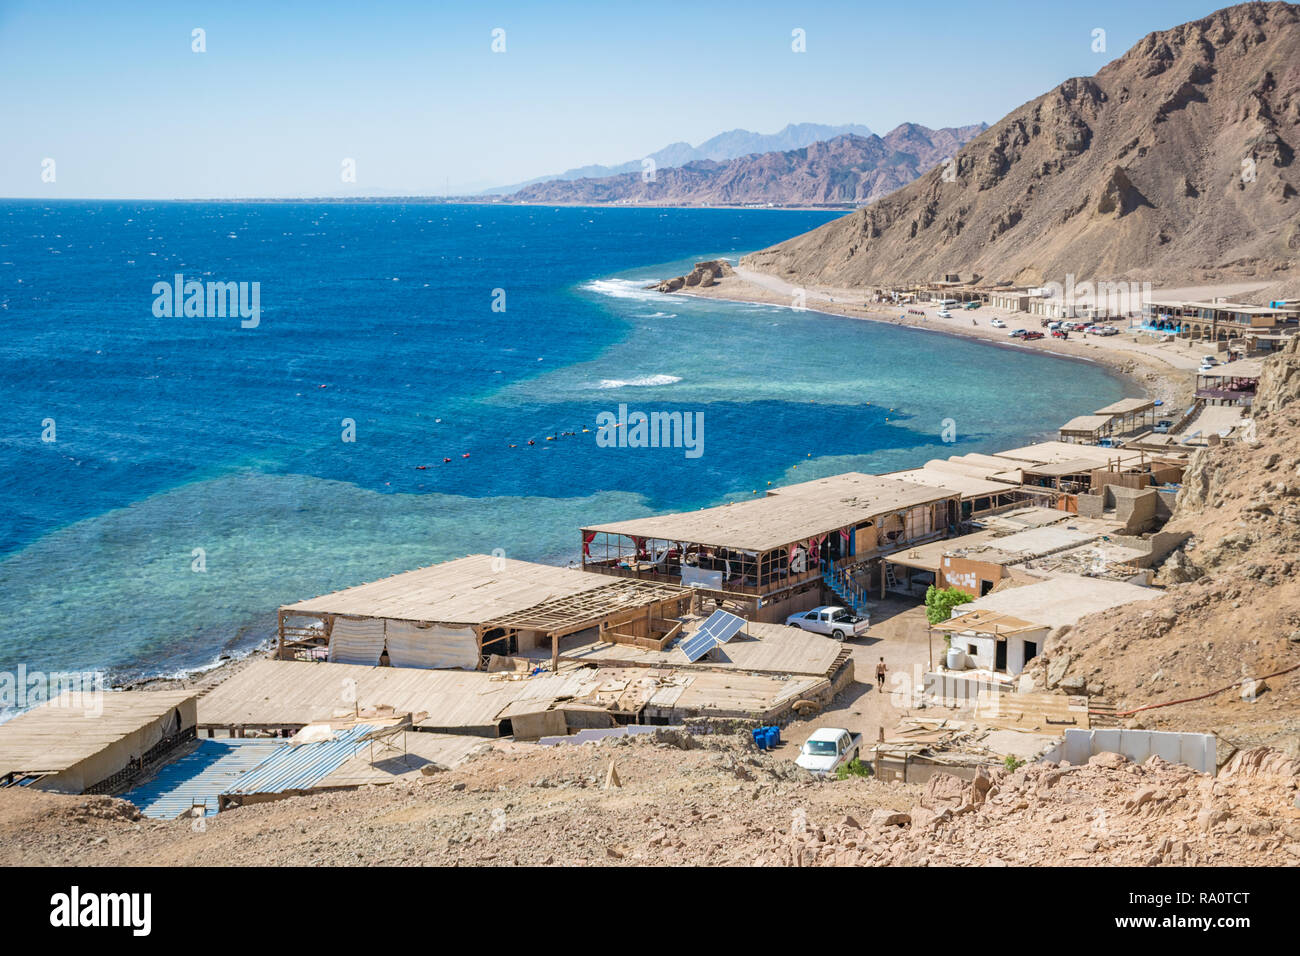 Blue Hole is a popular diving location on east Sinai, a few kilometres north of Dahab, Egypt on the coast of the Red Sea. Stock Photo